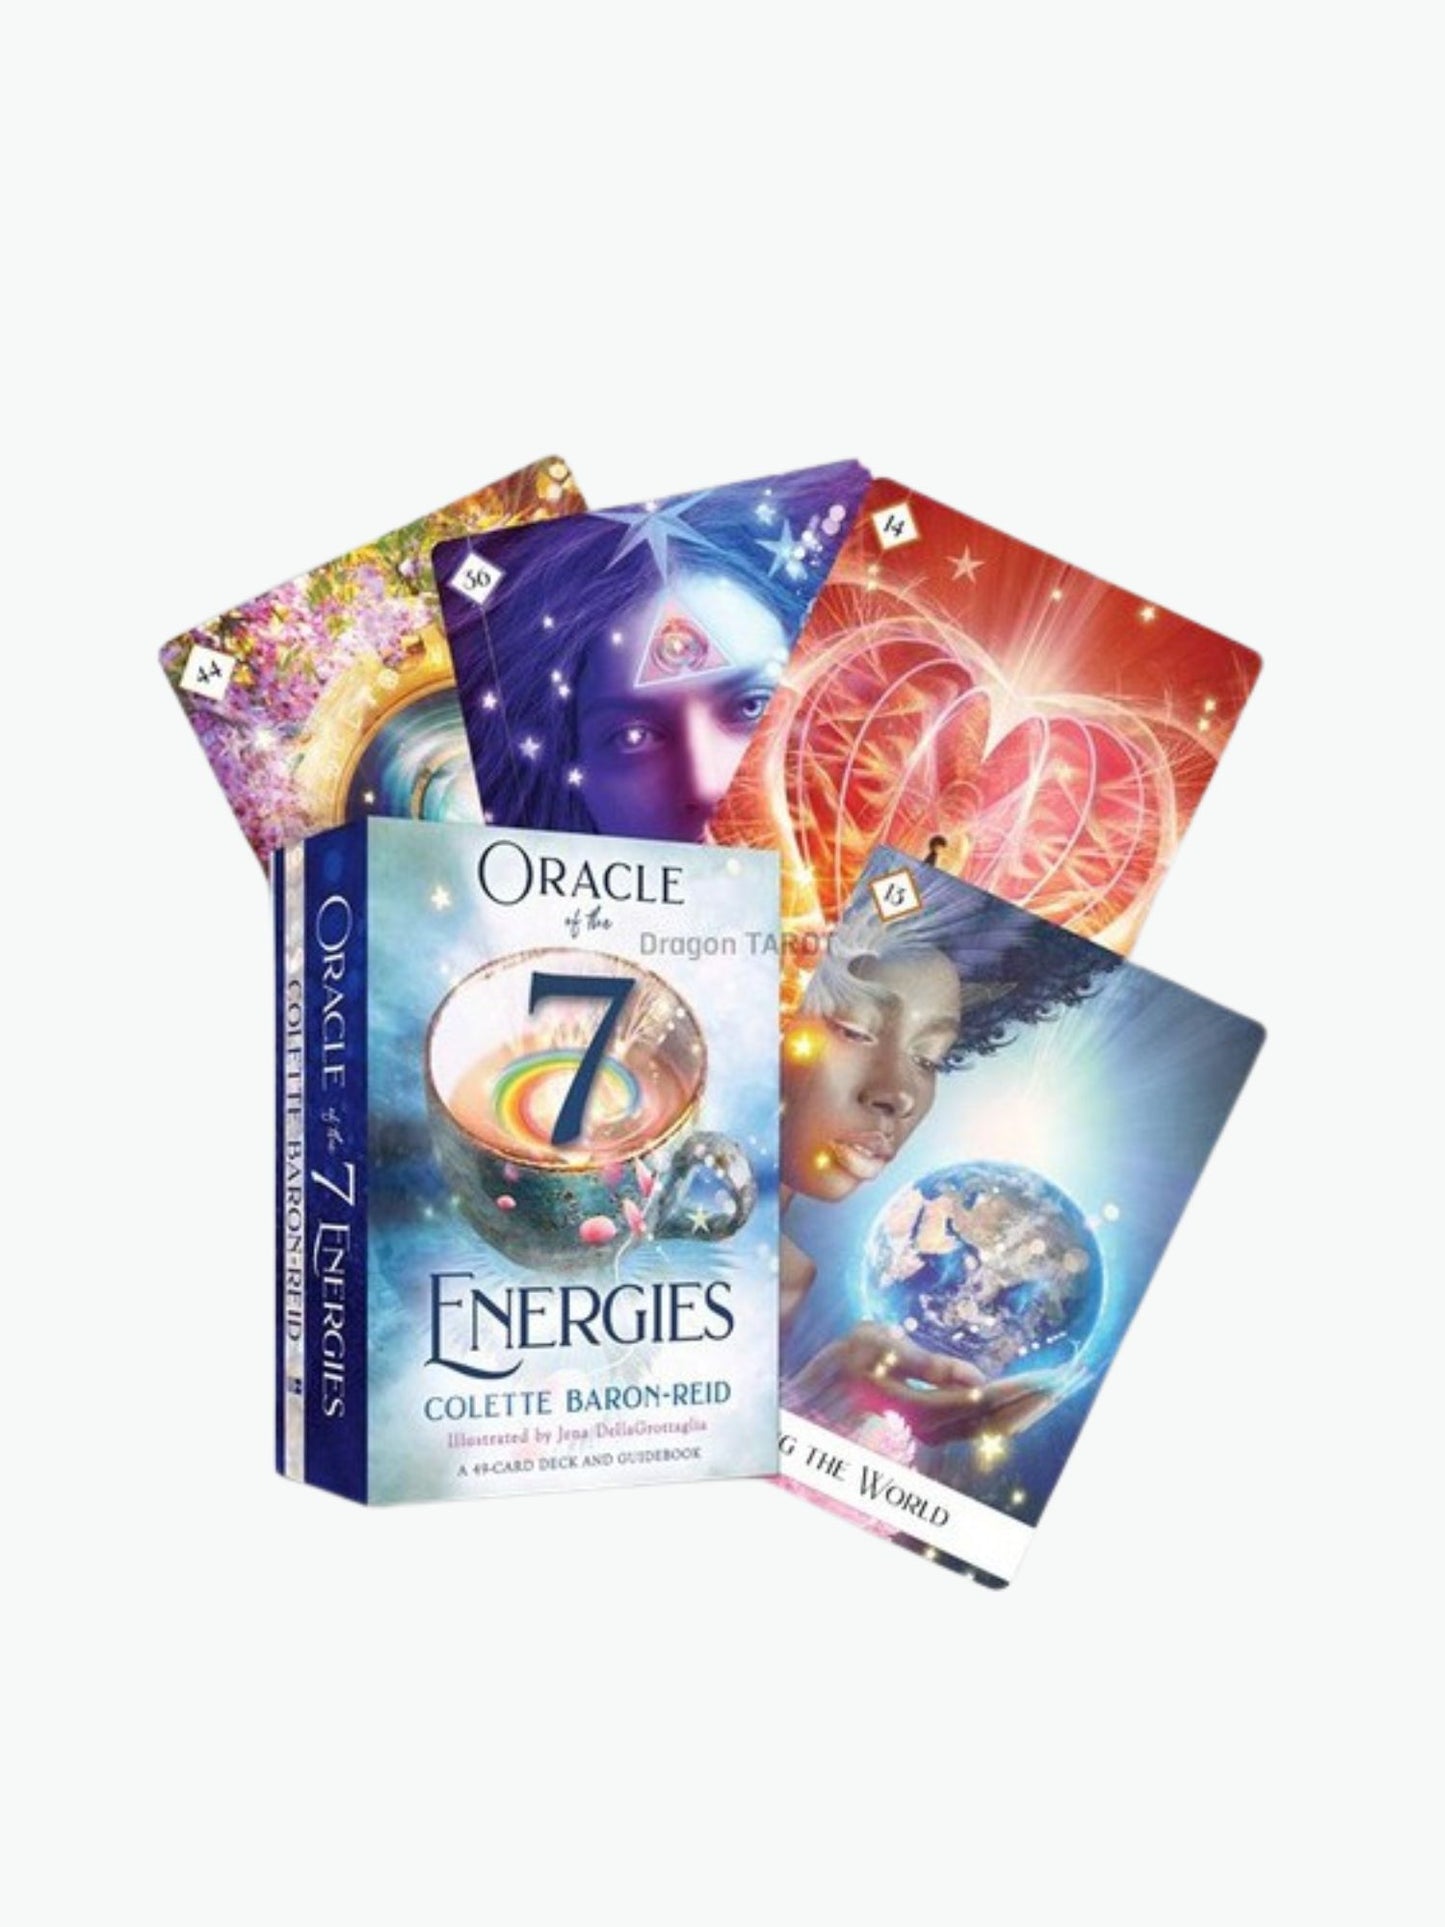 Oracle of the 7 Energies Oracle Cards